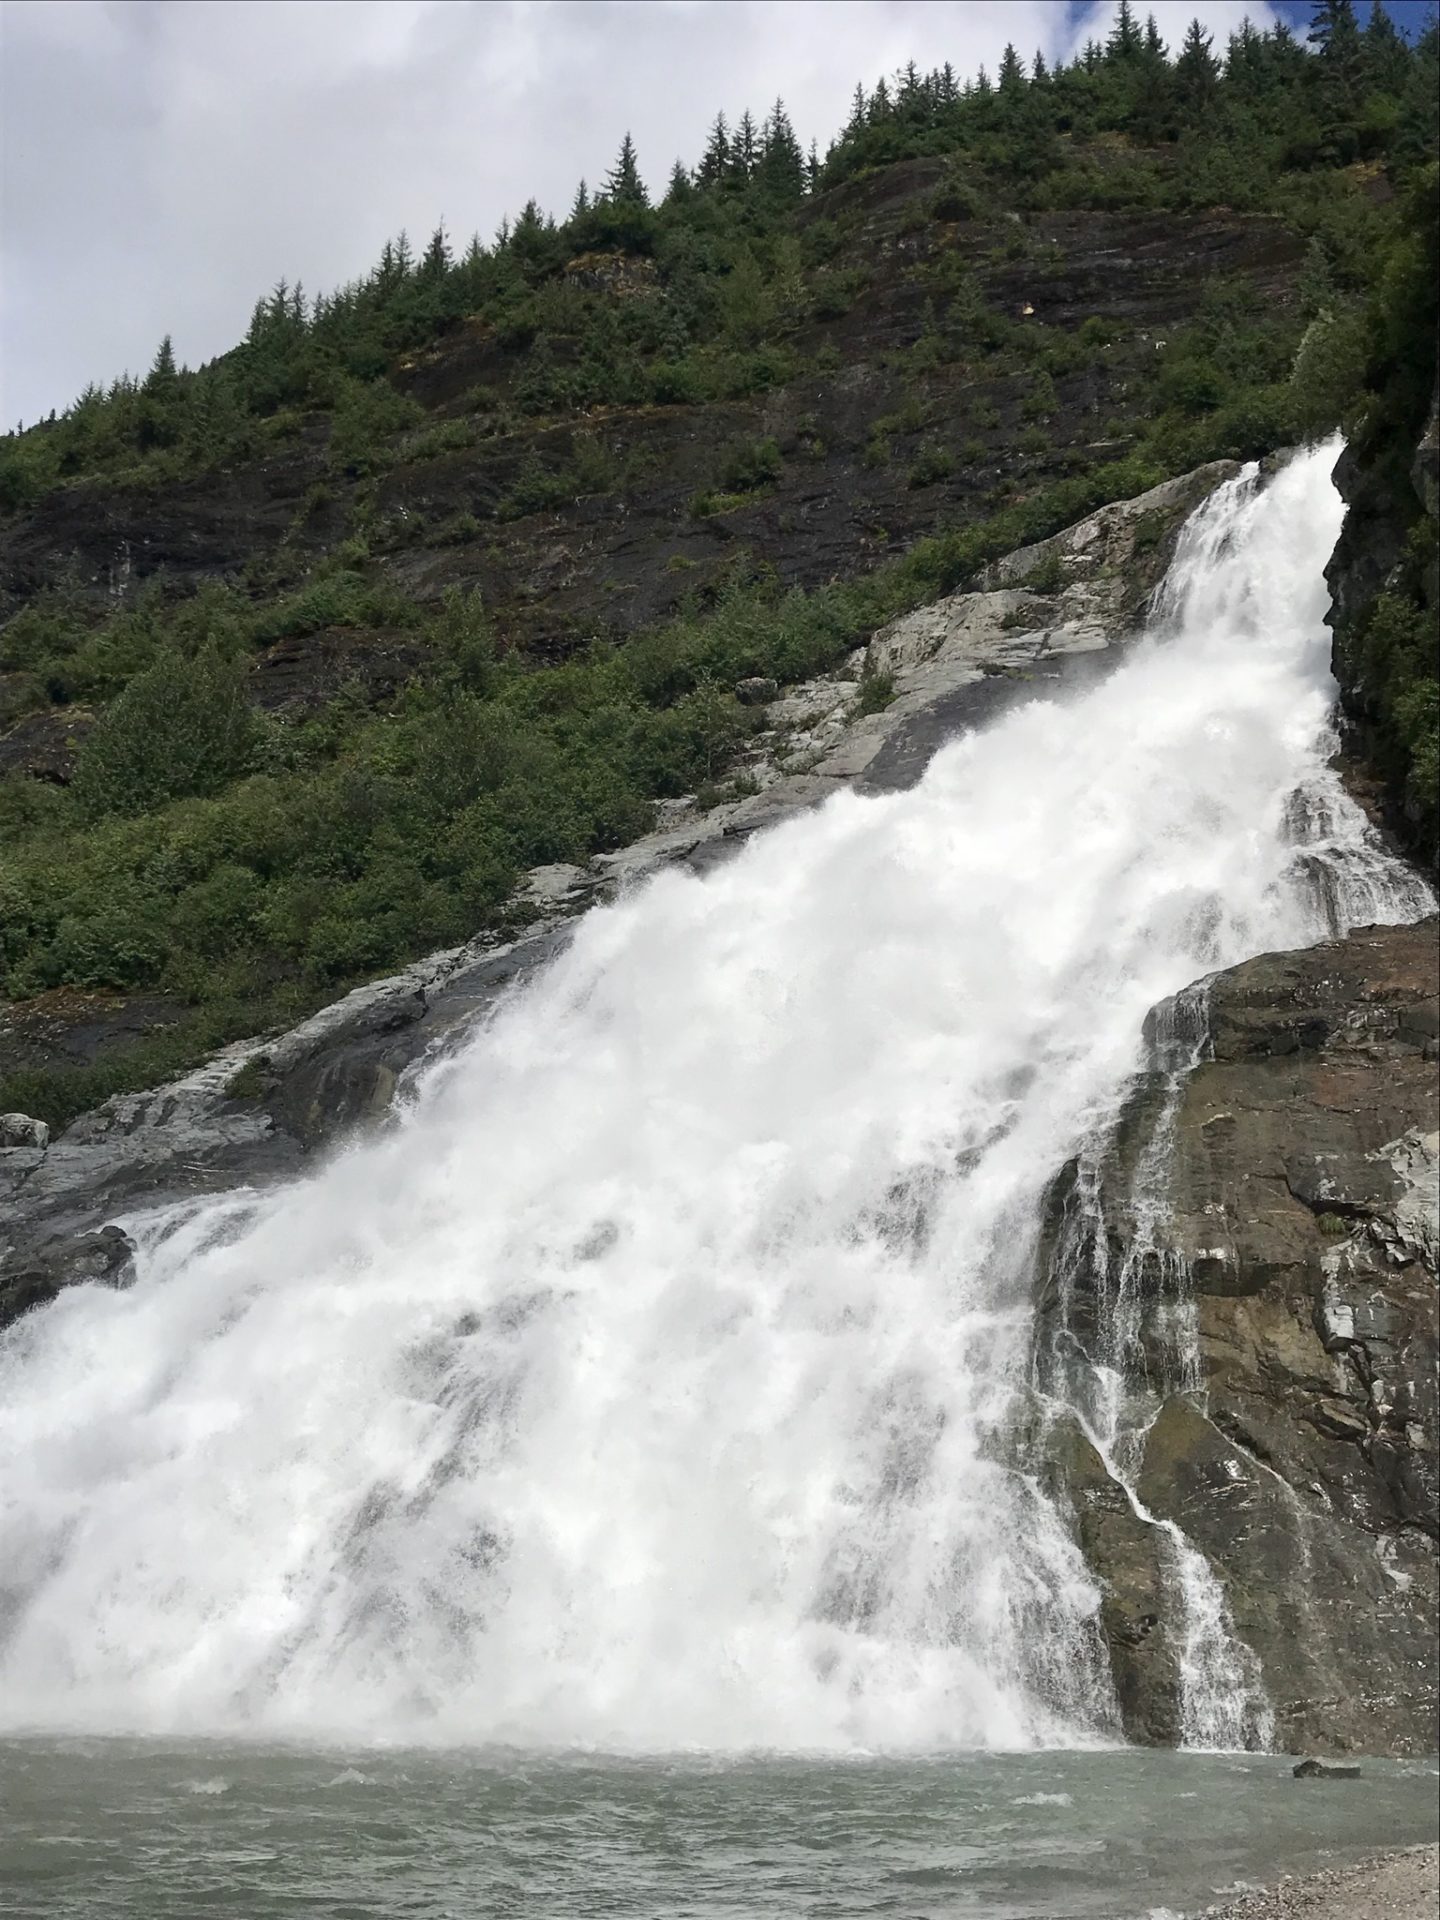 Nugget Falls itself is beautiful, but it’s also only half the distance to Mendenhall Glacier as is the visitor’s center. So the views are better. The day we visited, we even saw a mountain goat way up near the top!